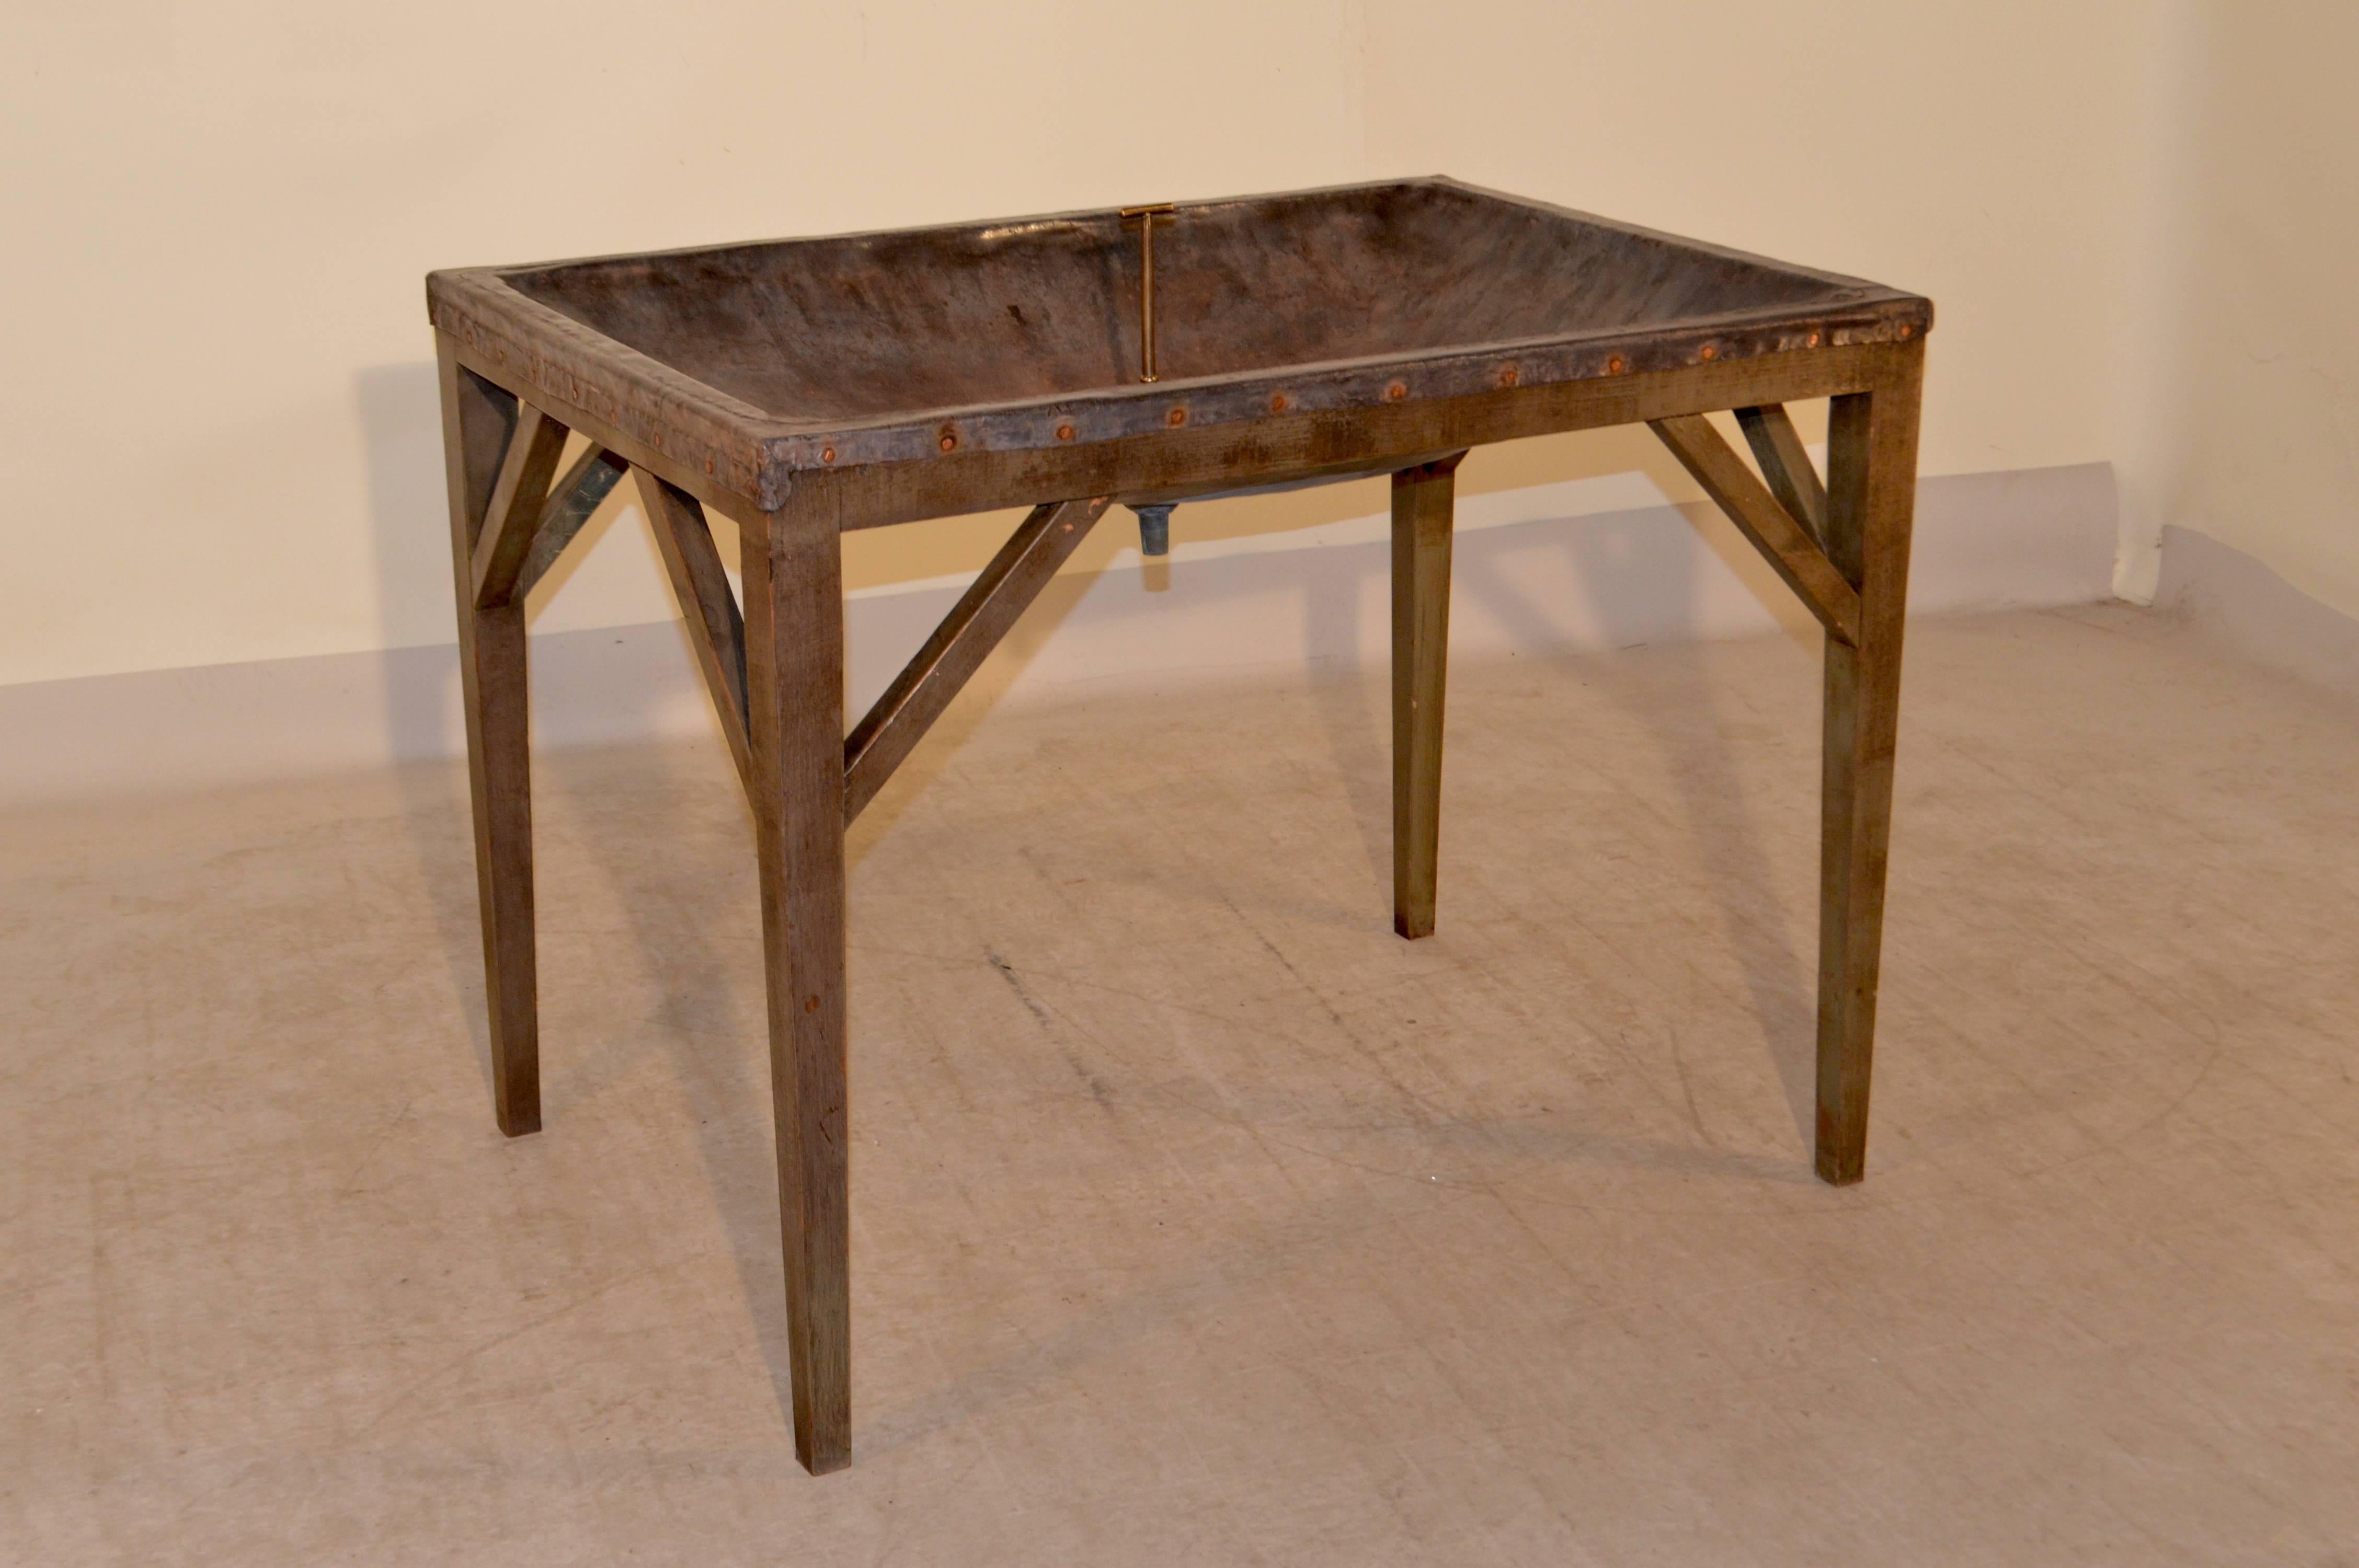 19th century unusual English dairy skimming table with zinc top and original brass drain plug. The table was used to skim the cream from the top of milk in early dairies. These are fantastic for wine and drink coolers filled with ice! The trough